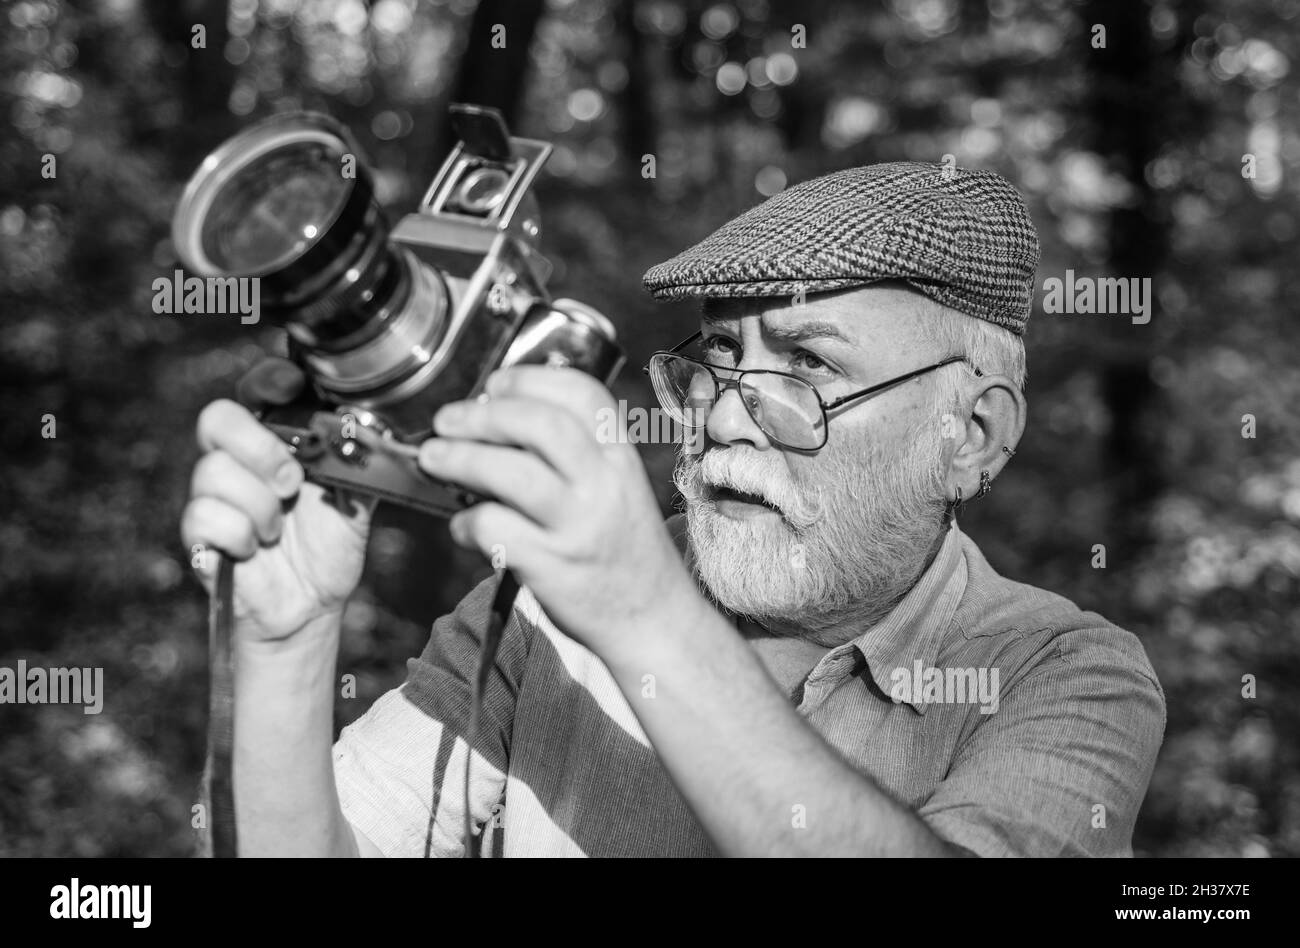 Pension hobby. Experienced photographer. Vintage camera. Old man shoot nature. Professional photographer. Make perfect frame. Landscape nature photo Stock Photo